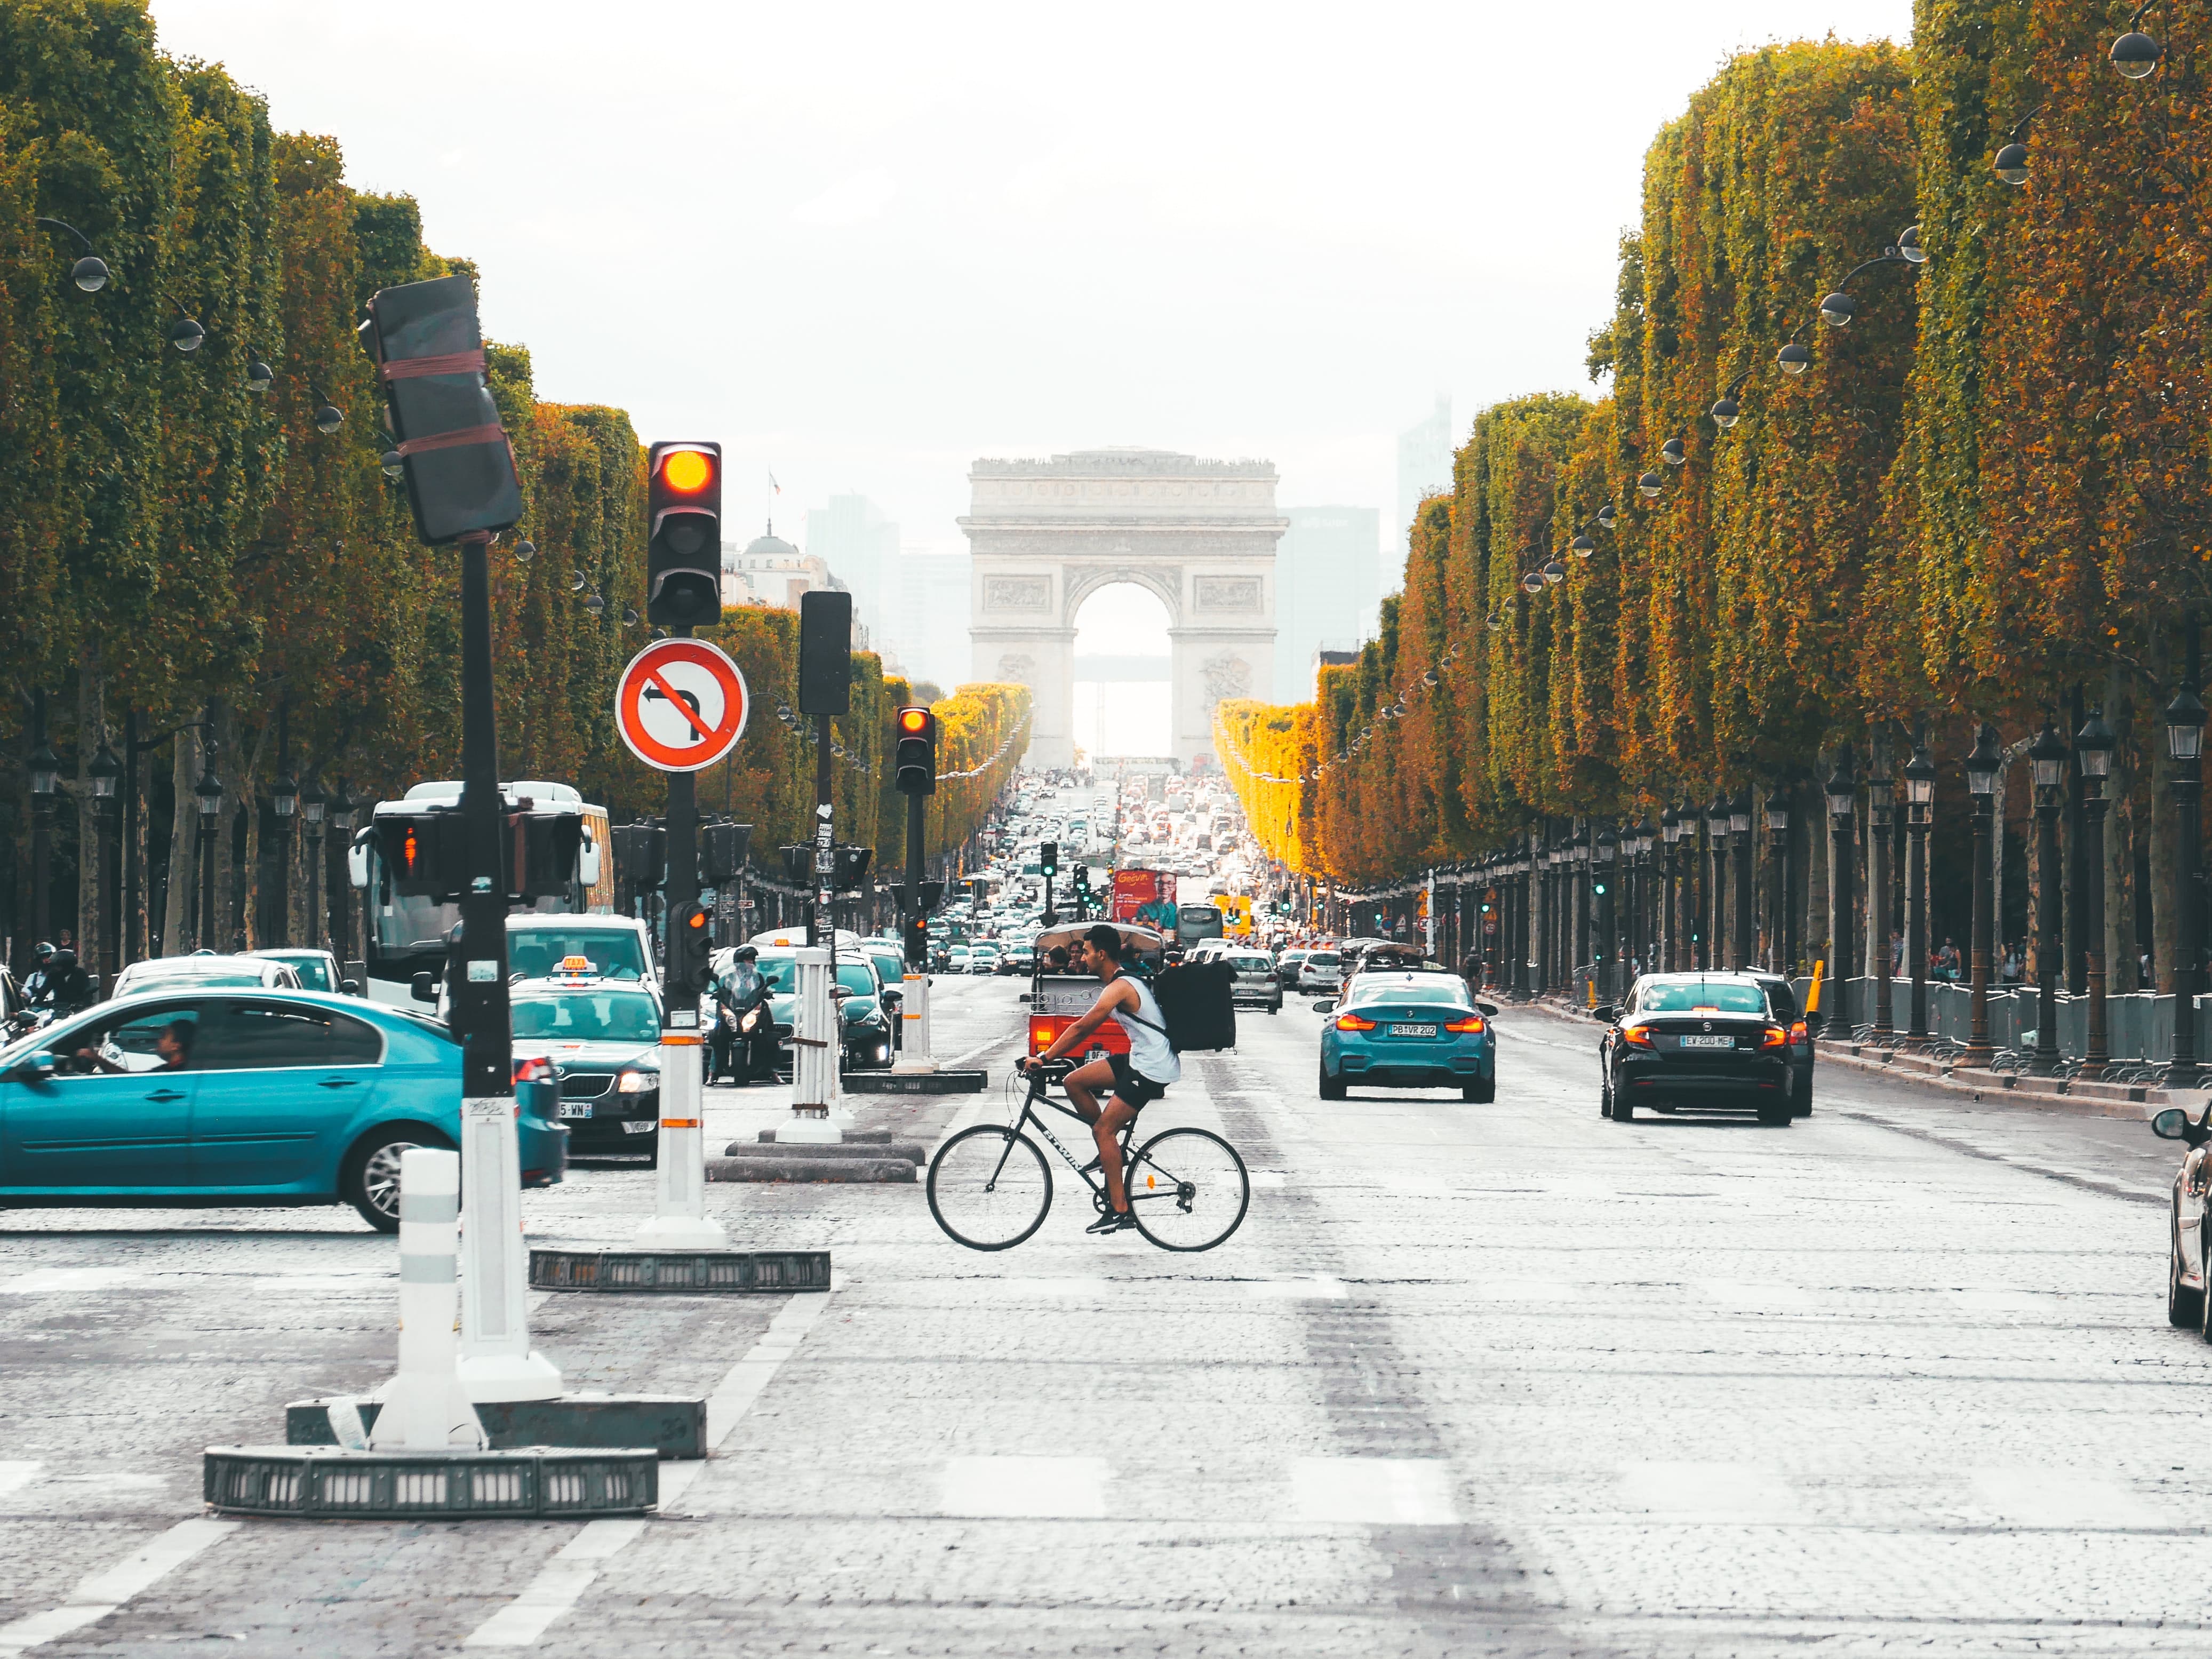 man-on-a-bicycle-crossing-the-road-leading-to-the-Arc-de-Triomphe-de-l'Étoile-in-Paris-busy-traffic